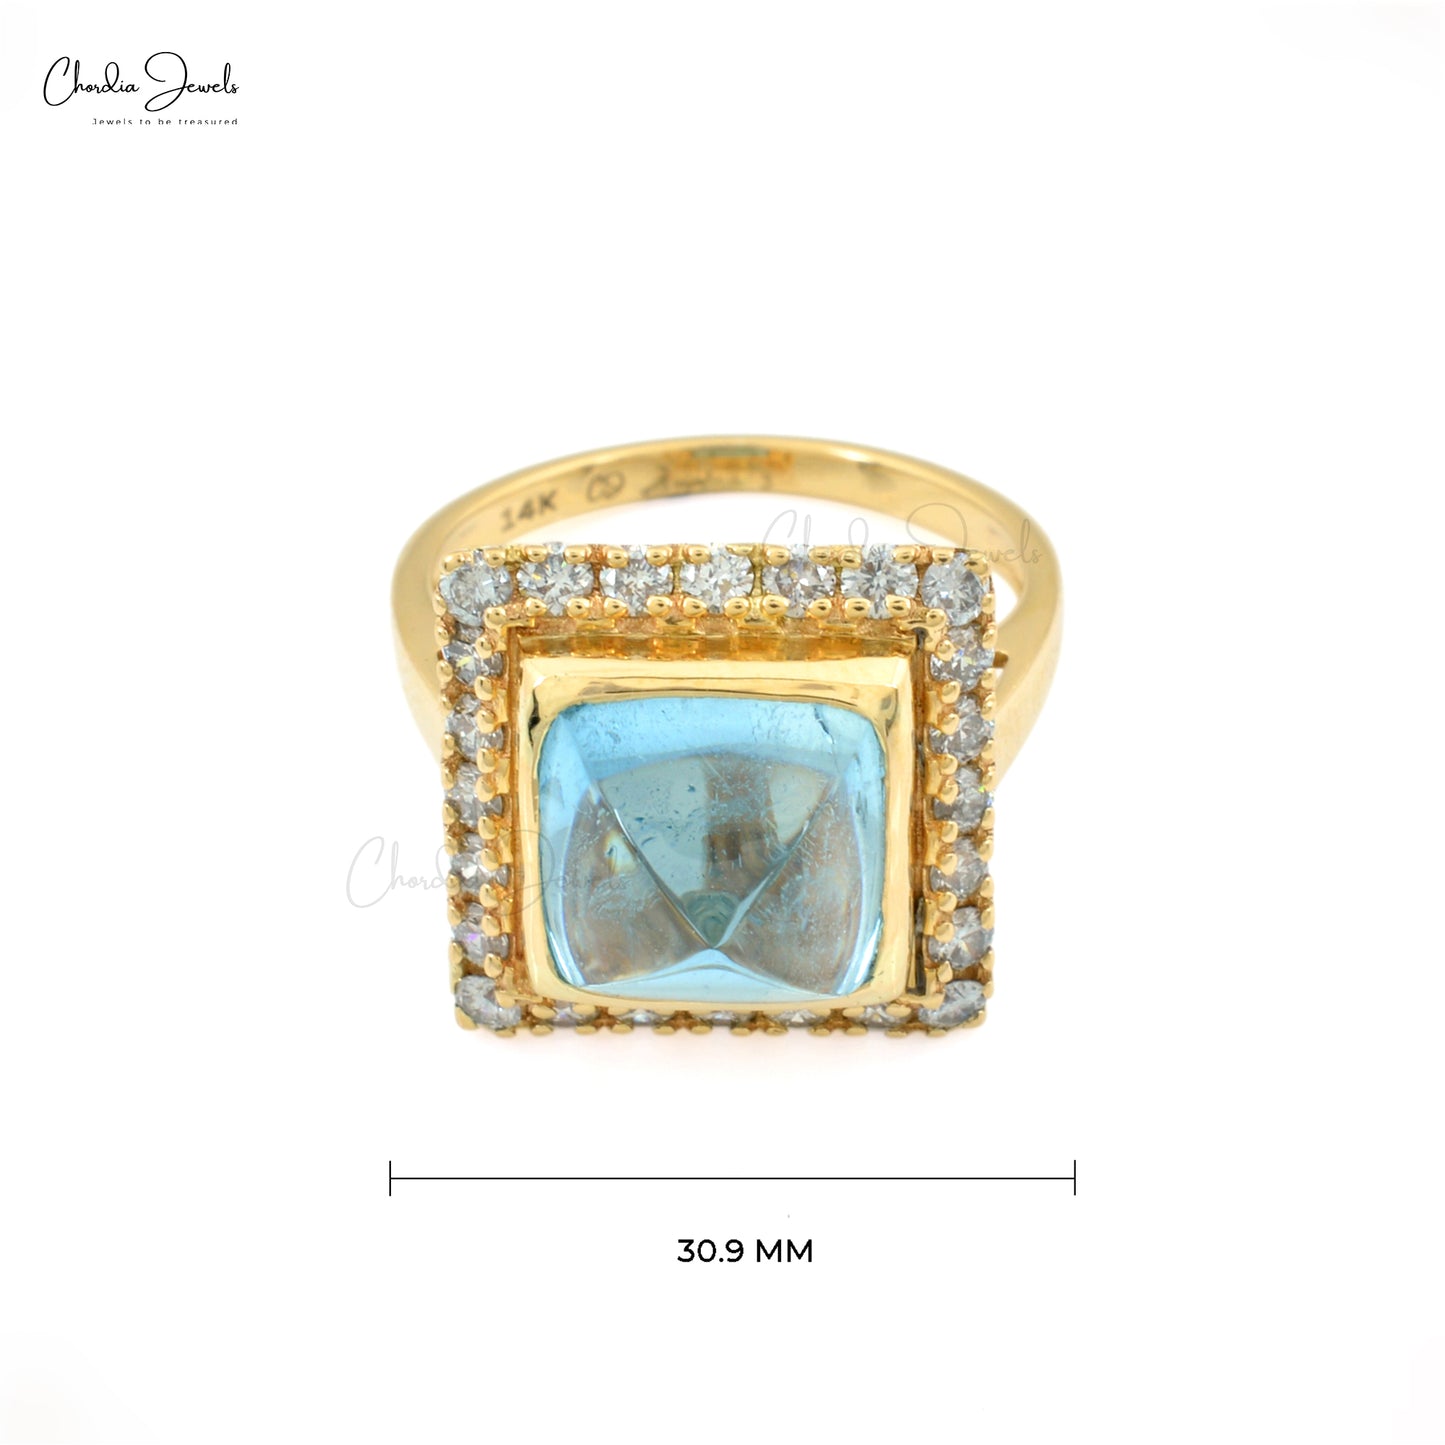 Genuine Aquamarine Sugarloaf Halo Ring Size US-7 14k Solid Gold Diamond Ring For Her